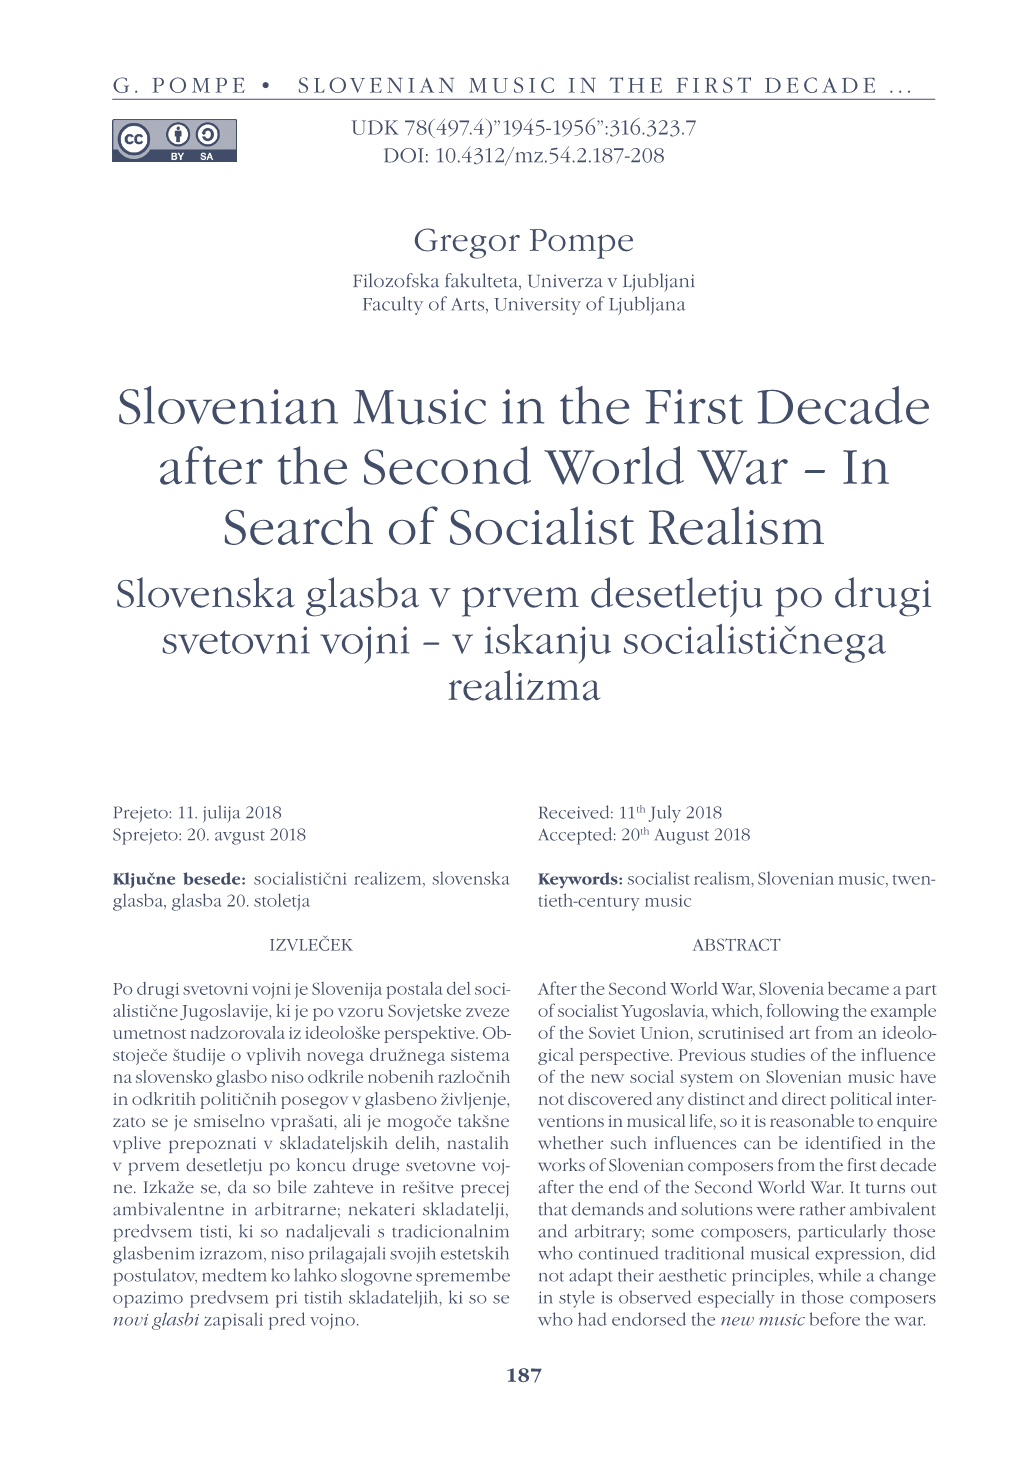 Slovenian Music in the First Decade After the Second World